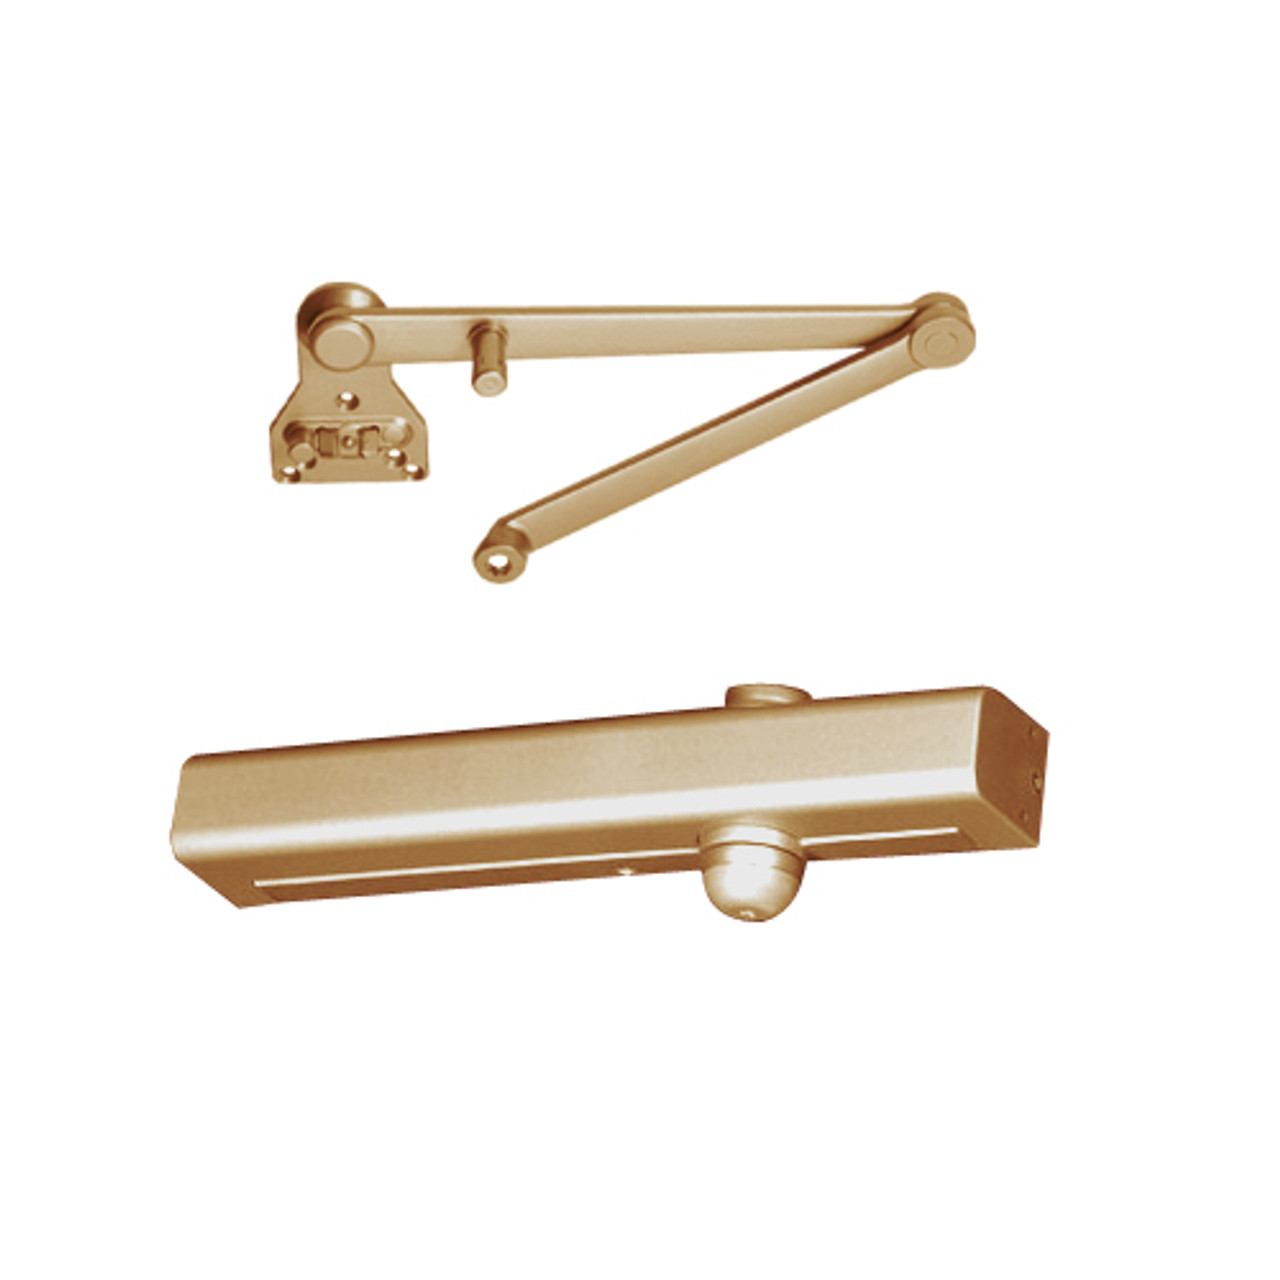 CLP8301RDA-691 Norton 8000 Series Hold Open Door Closers with CloserPlus Ramp Arm in Dull Bronze Finish